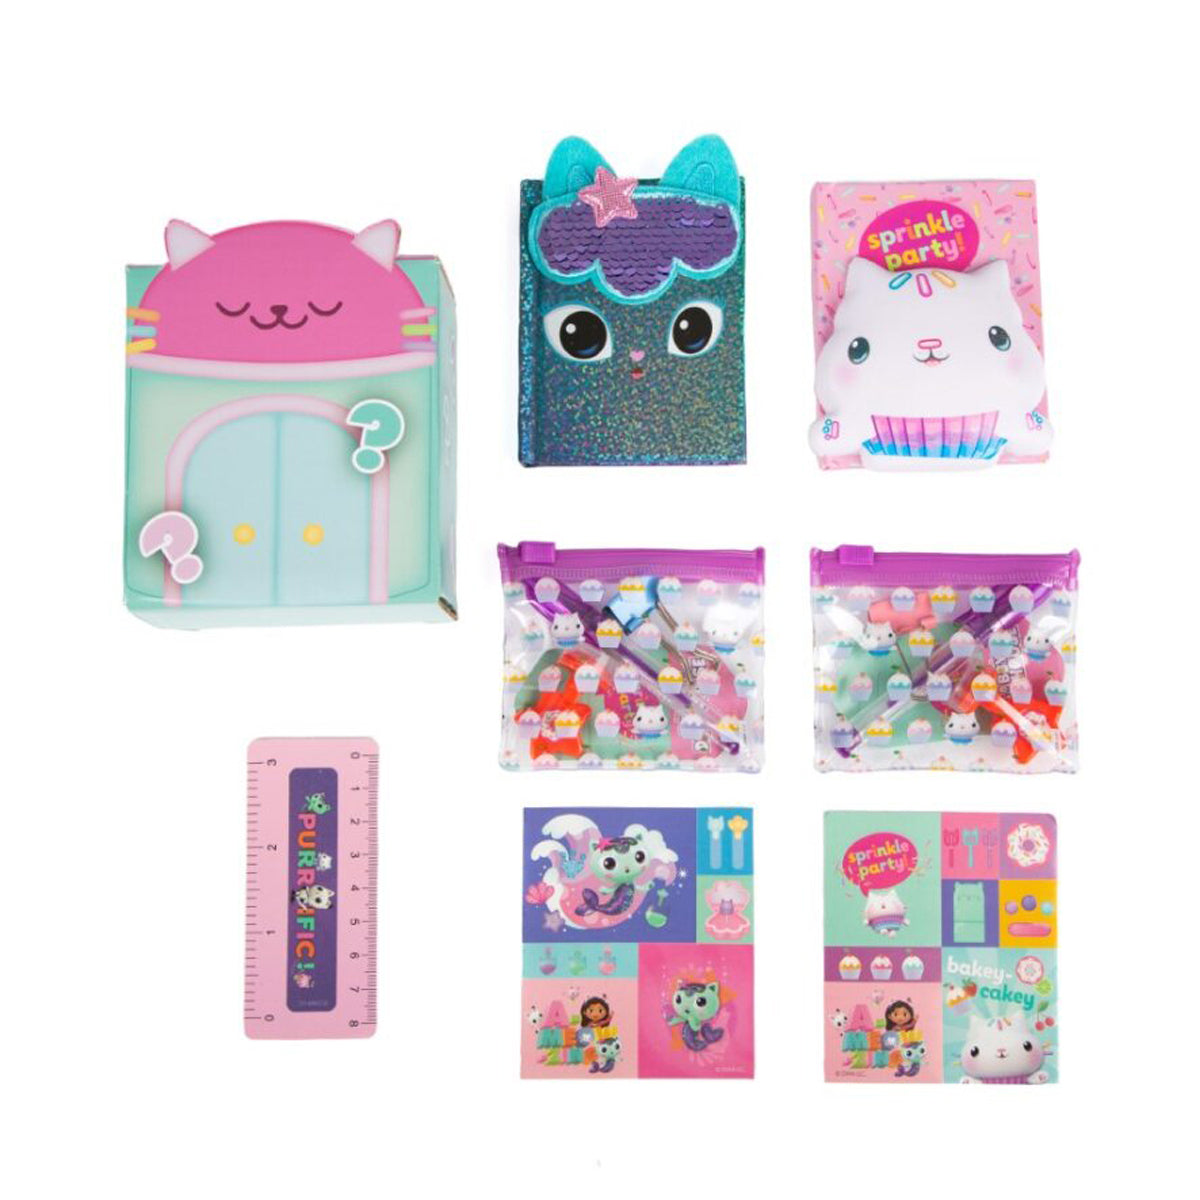 Gabby's Dollhouse Mini Diary Surprise Collection